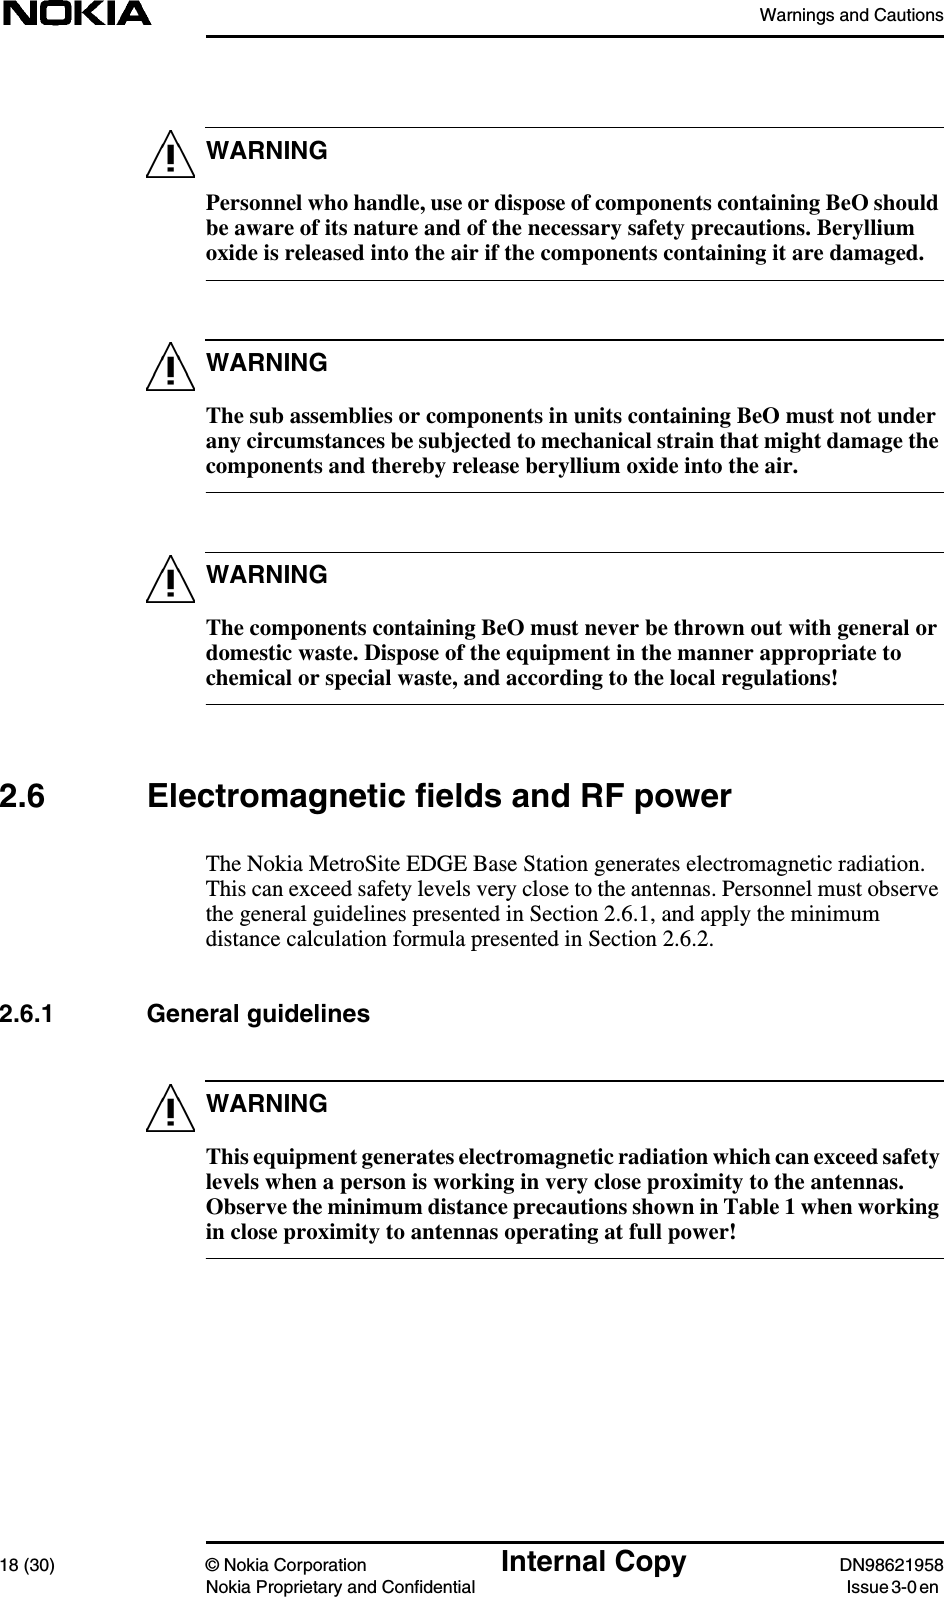 Warnings and Cautions18 (30) © Nokia Corporation Internal Copy DN98621958Nokia Proprietary and Confidential Issue 3-0 enWARNINGWARNINGWARNINGWARNINGPersonnel who handle, use or dispose of components containing BeO shouldbe aware of its nature and of the necessary safety precautions. Berylliumoxide is released into the air if the components containing it are damaged.The sub assemblies or components in units containing BeO must not underany circumstances be subjected to mechanical strain that might damage thecomponents and thereby release beryllium oxide into the air.The components containing BeO must never be thrown out with general ordomestic waste. Dispose of the equipment in the manner appropriate tochemical or special waste, and according to the local regulations!2.6 Electromagnetic fields and RF powerThe Nokia MetroSite EDGE Base Station generates electromagnetic radiation.This can exceed safety levels very close to the antennas. Personnel must observethe general guidelines presented in Section 2.6.1, and apply the minimumdistance calculation formula presented in Section 2.6.2.2.6.1 General guidelinesThis equipment generates electromagnetic radiation which can exceed safetylevels when a person is working in very close proximity to the antennas.Observe the minimum distance precautions shown in Table 1 when workingin close proximity to antennas operating at full power!